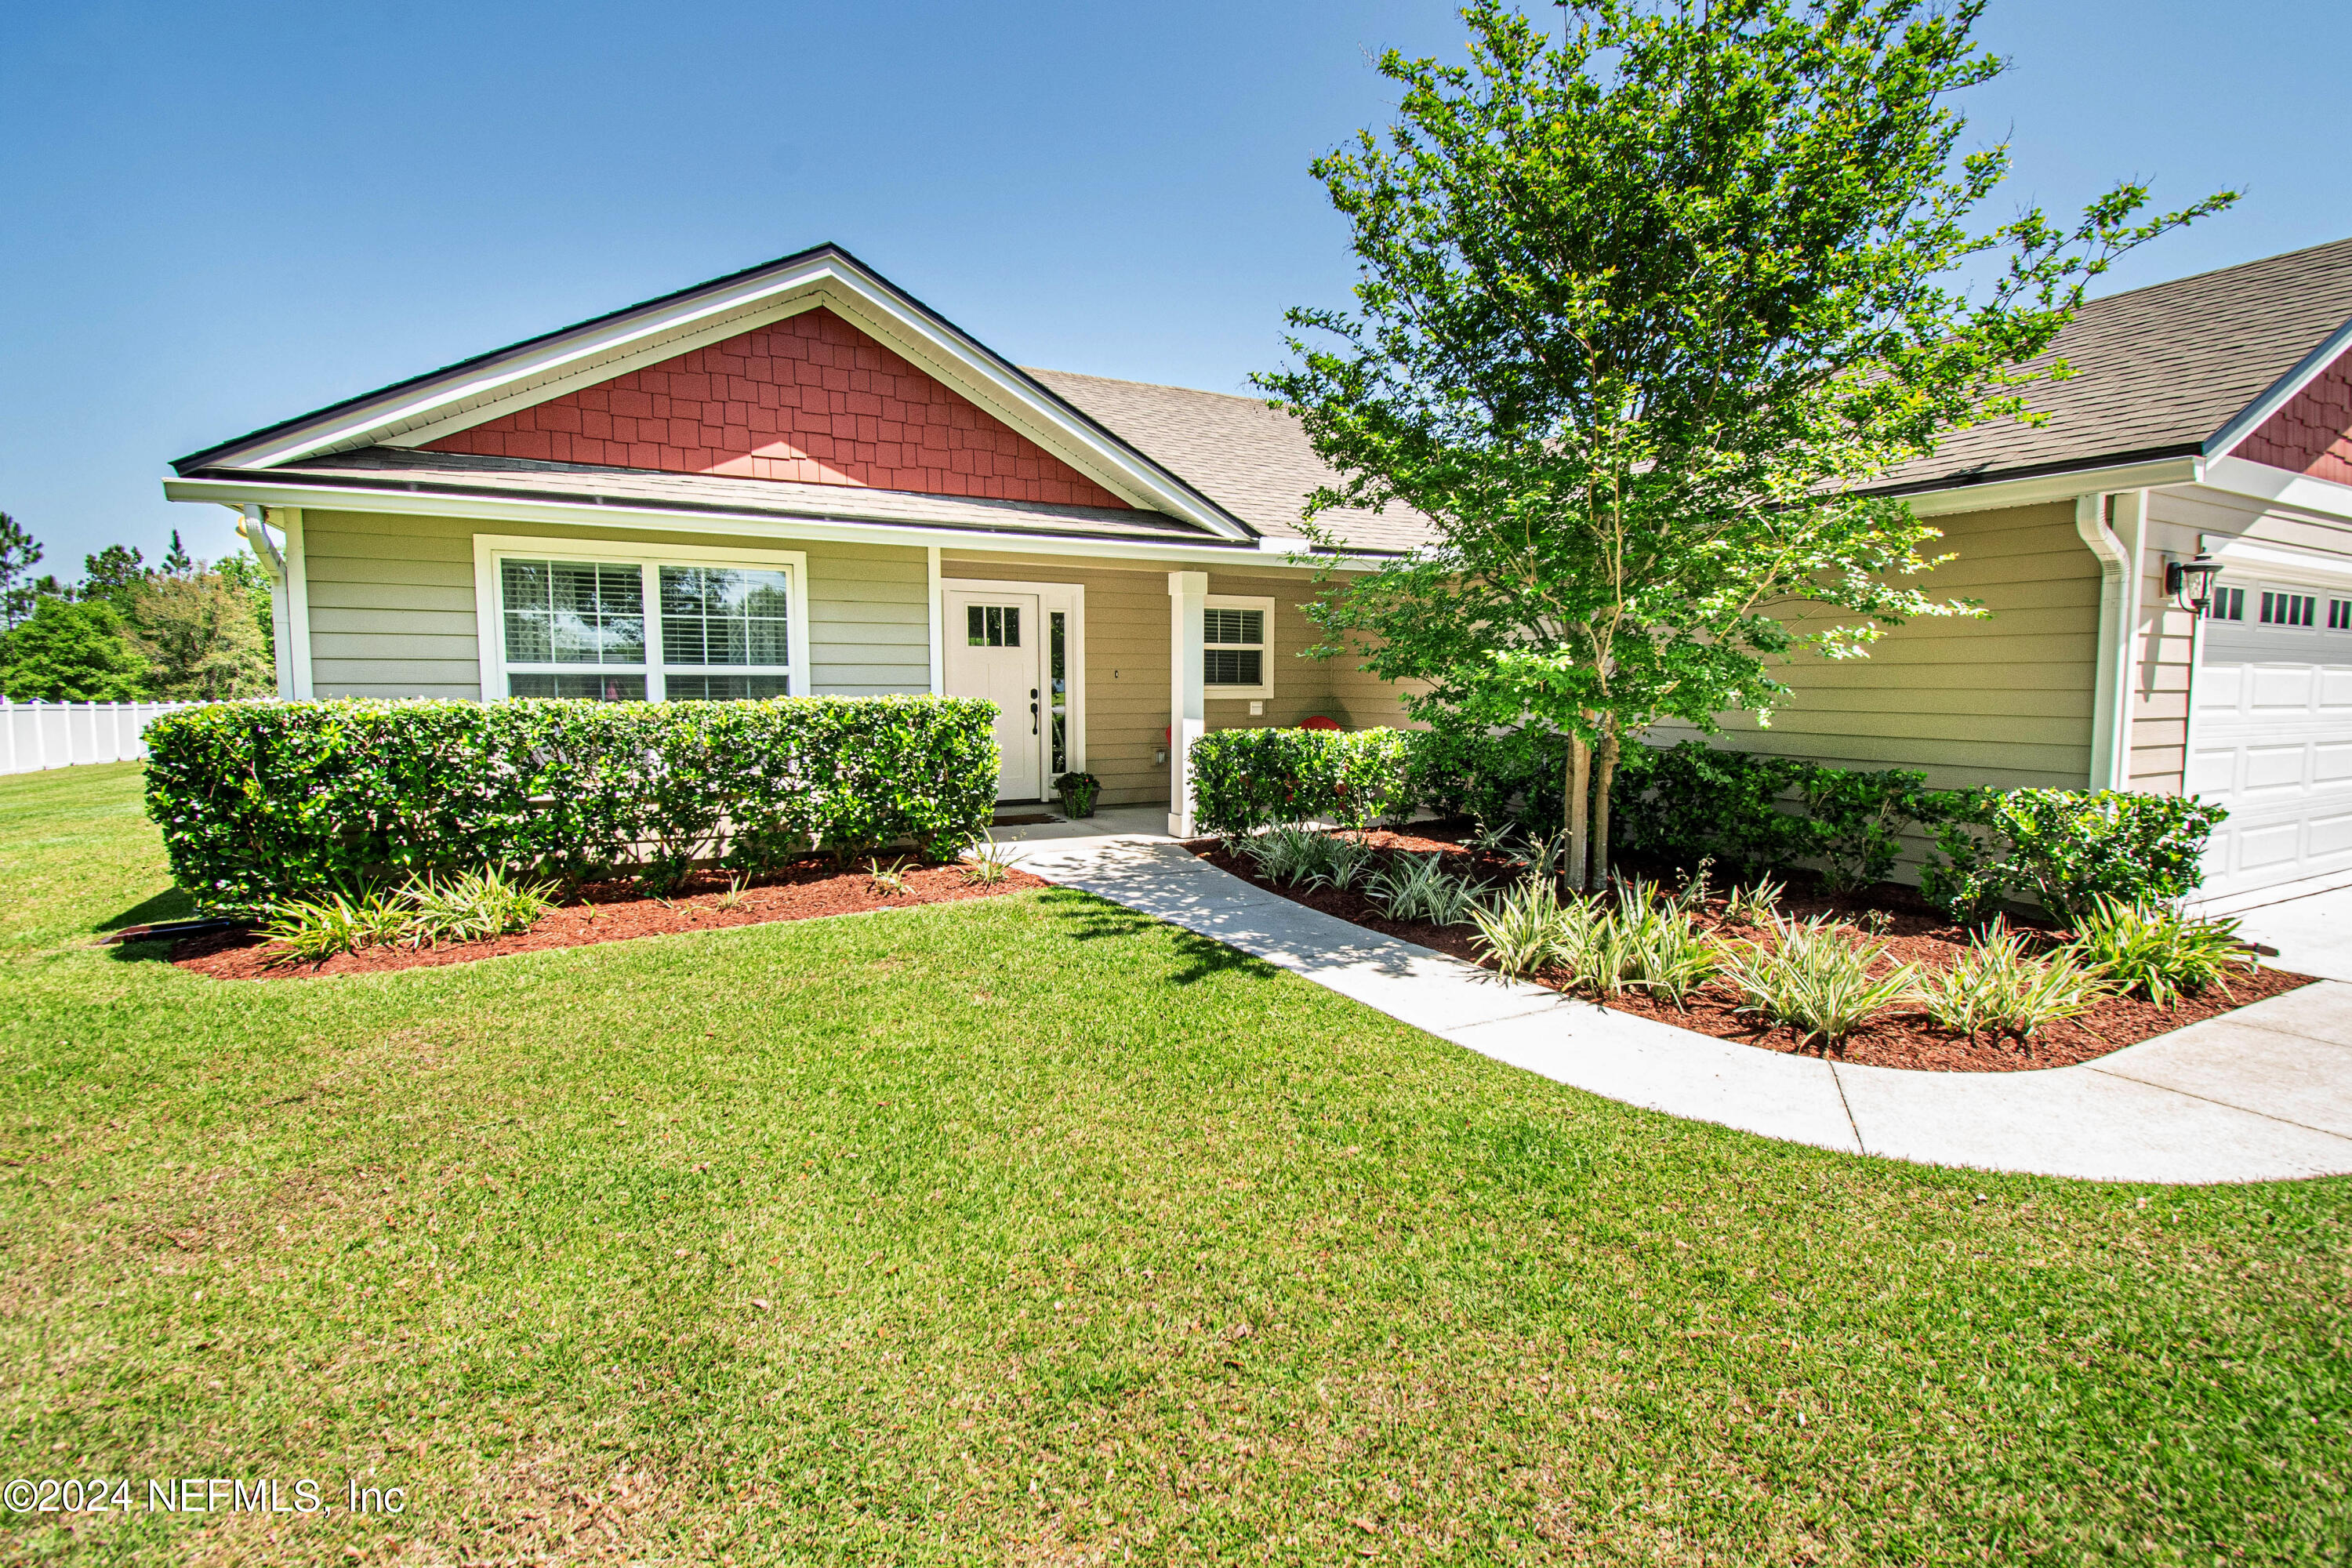 Glen St. Mary, FL home for sale located at 8183 Odis Yarborough Road, Glen St. Mary, FL 32040